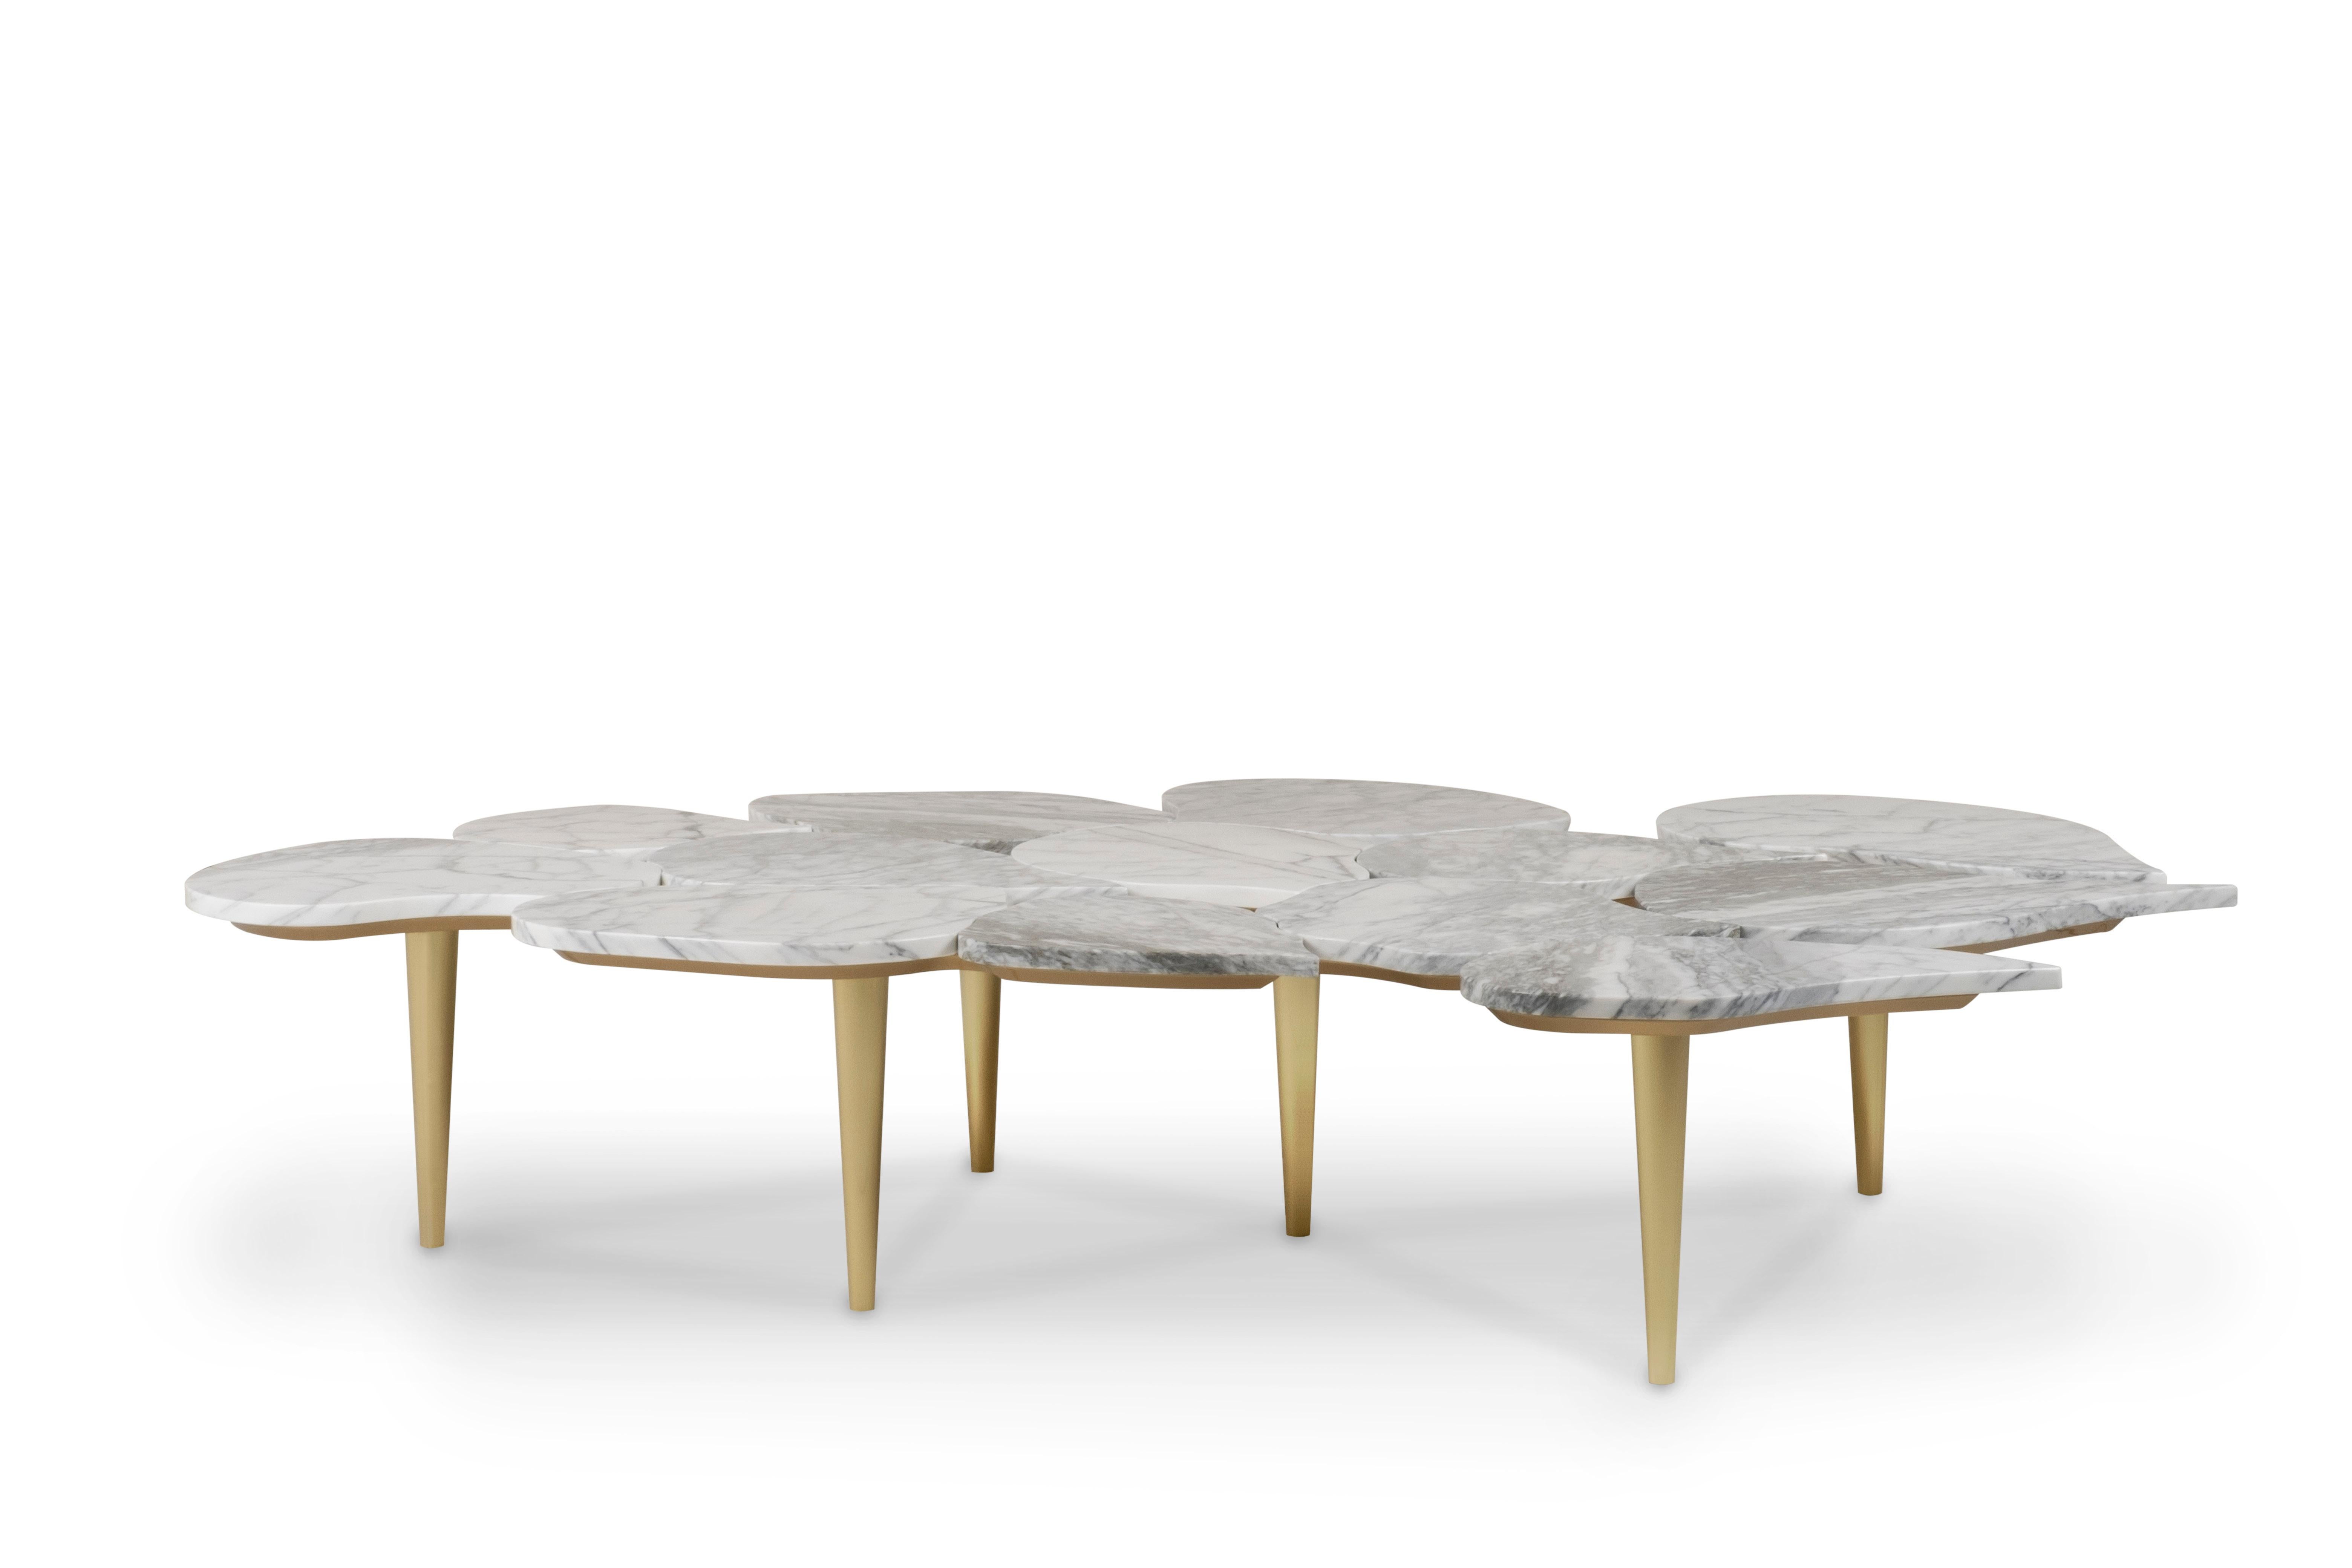 Lacquered Modern Infinity Coffee Tables, Carrara Marble, Handmade Portugal by Greenapple For Sale